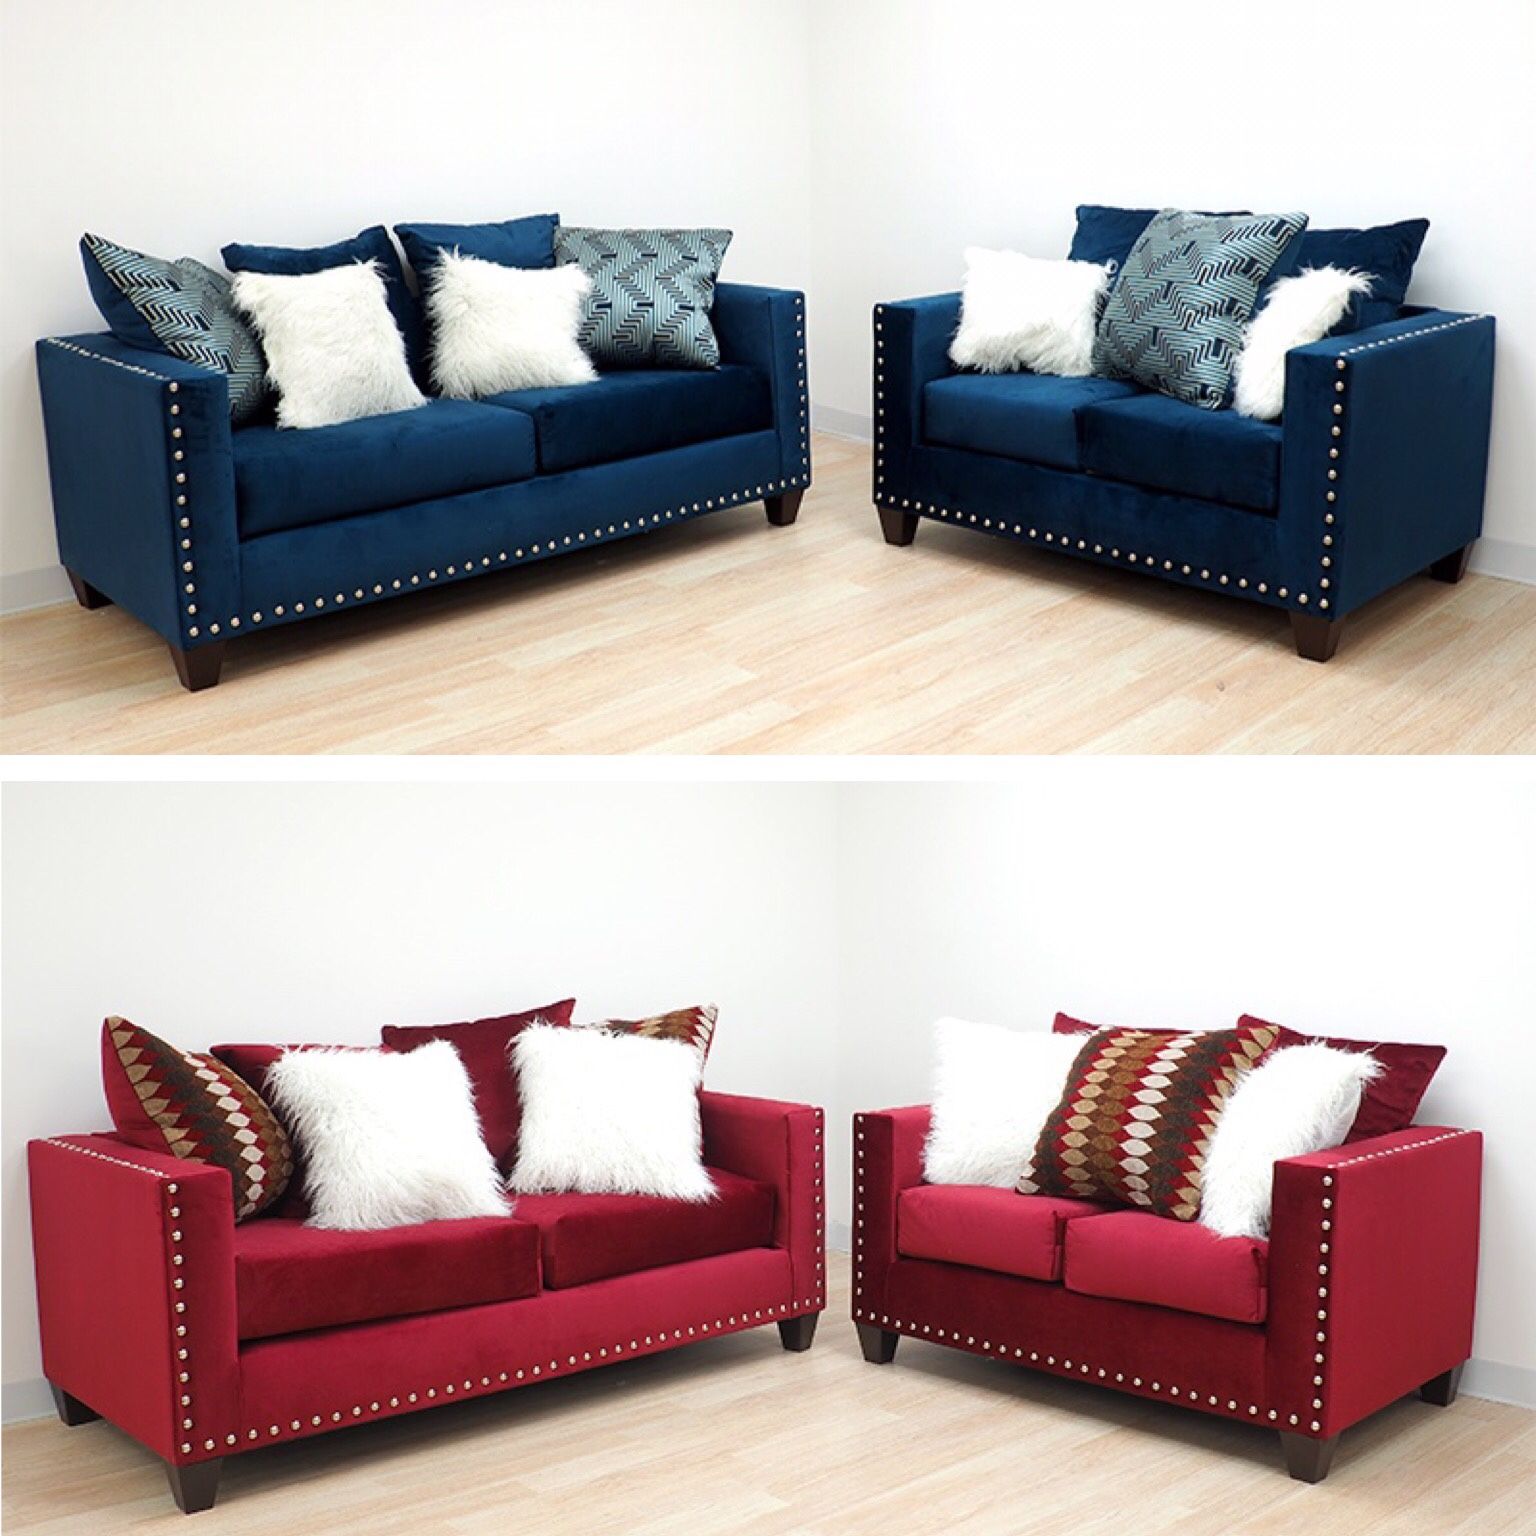 2-PCS Sofa And Love Seat In Offer 🔥🔥🔥